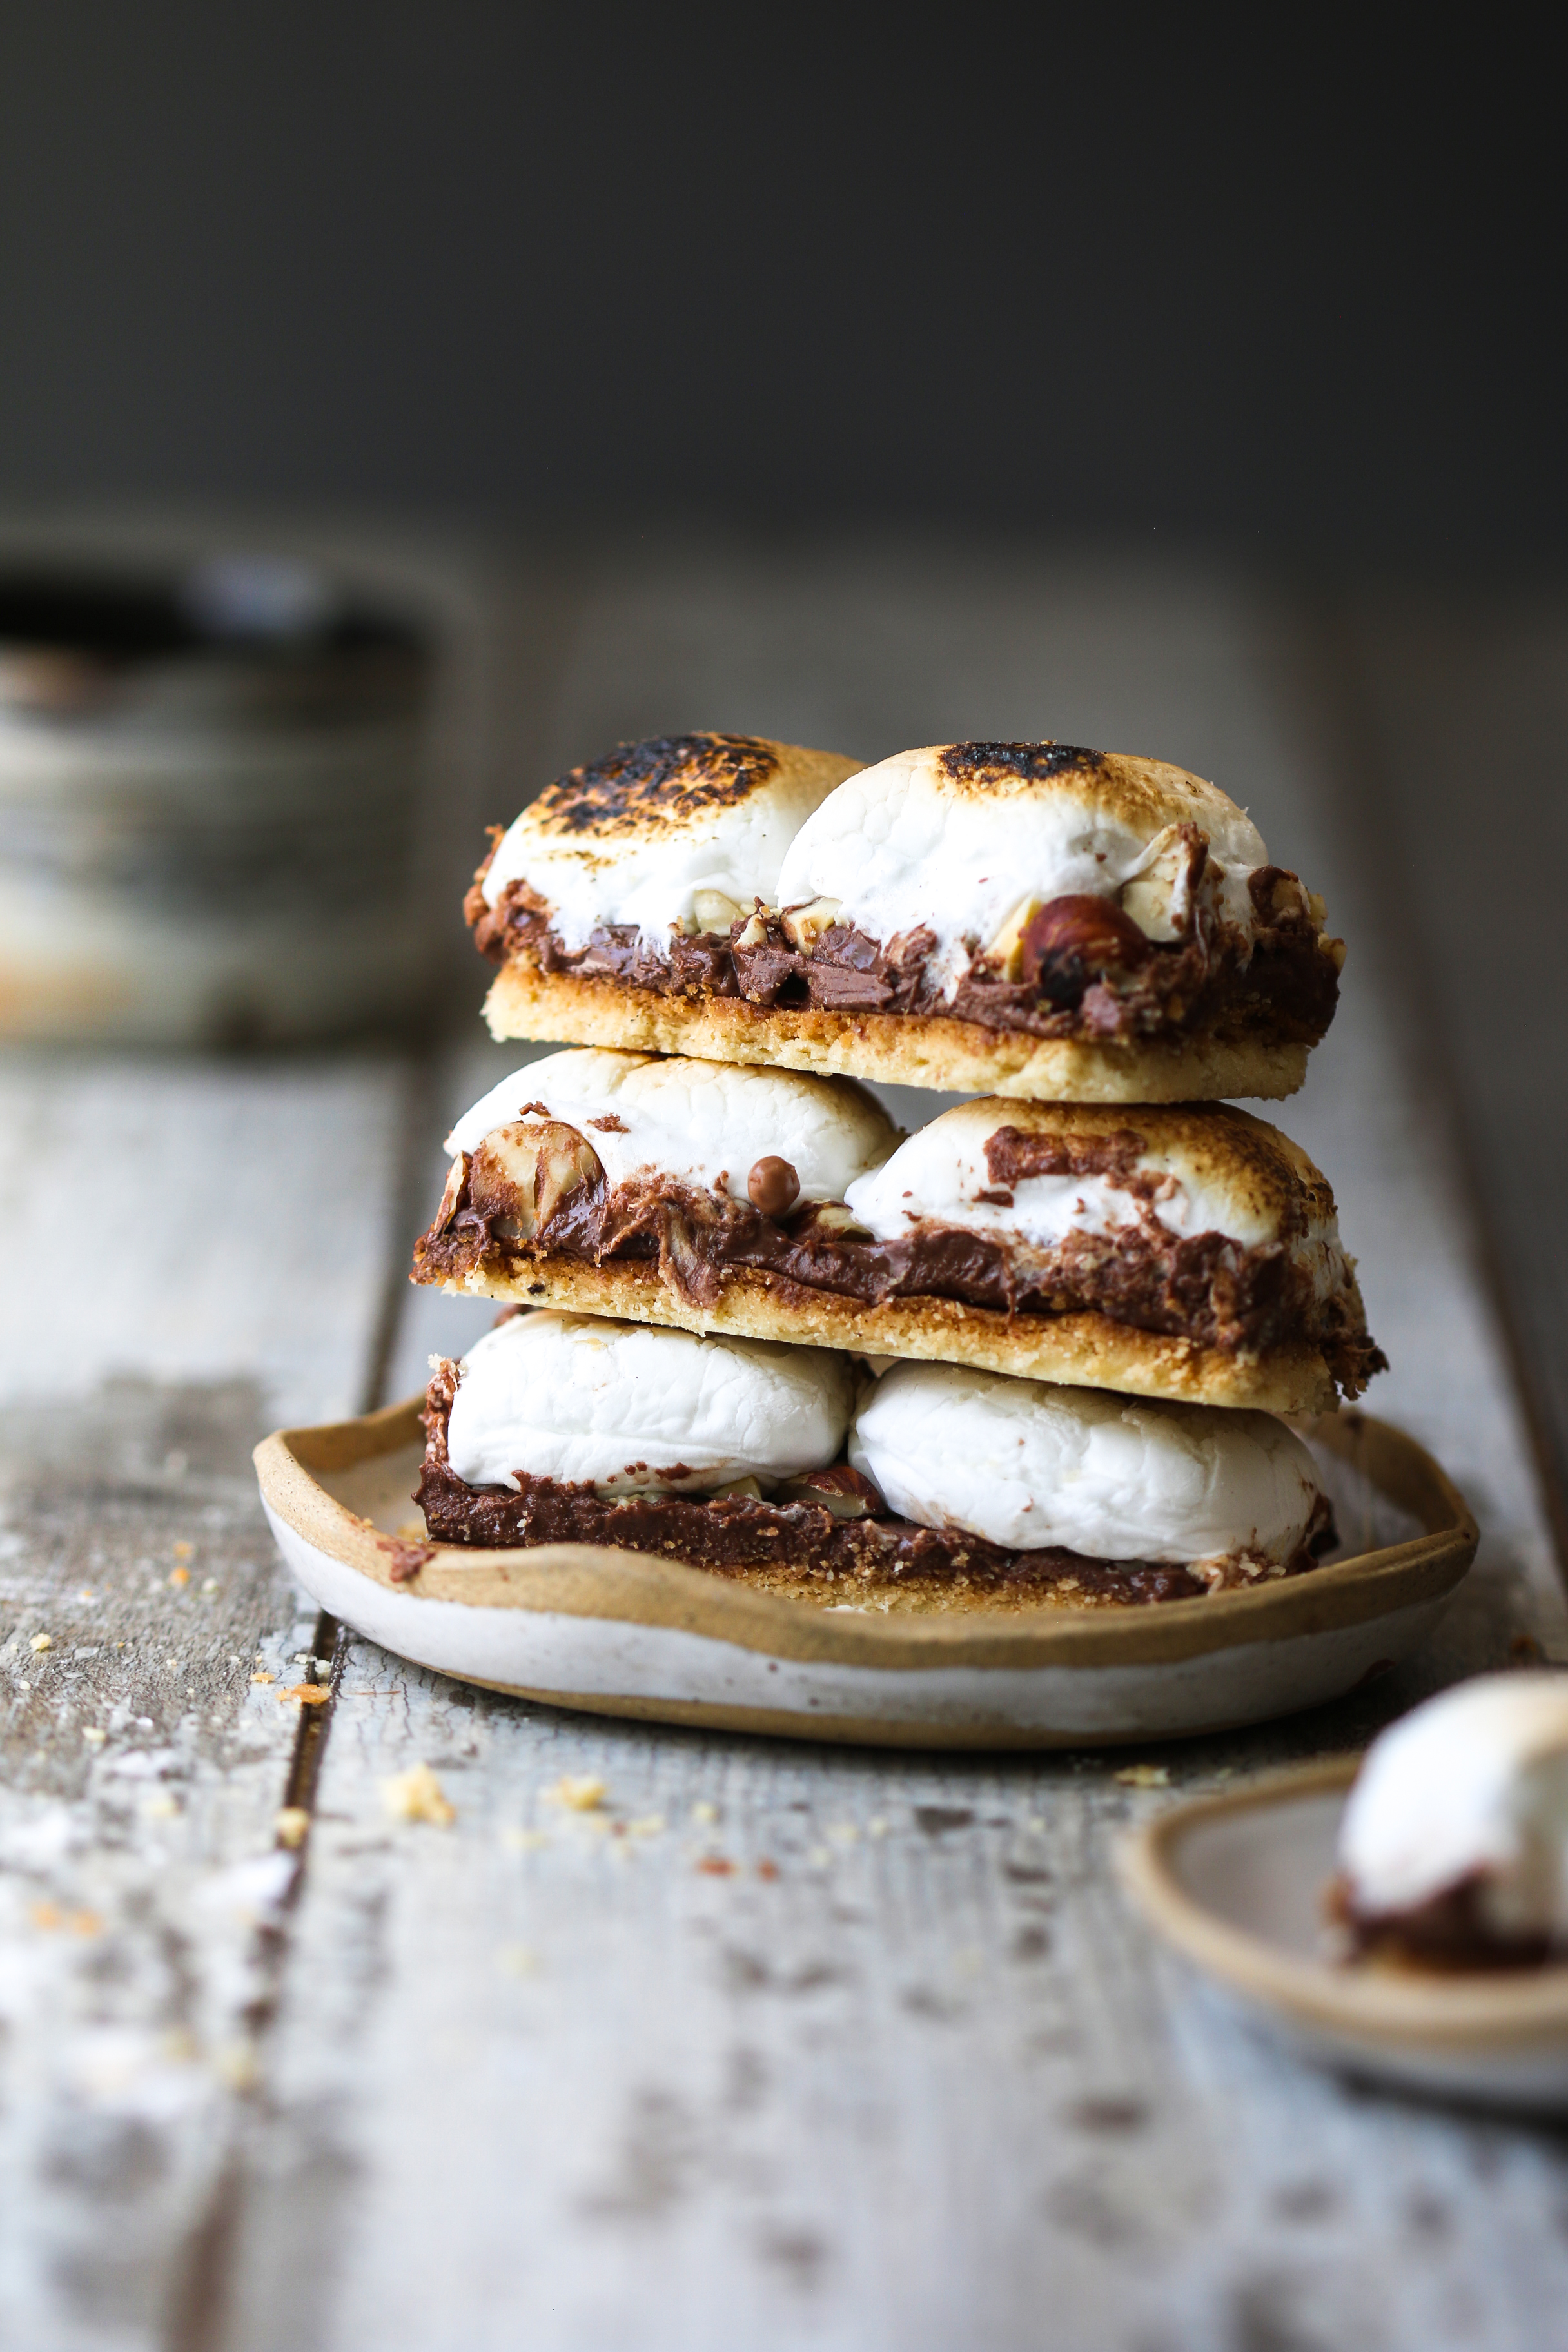 Over the TOP Toasted Chocolate Hazelnut S'mores Bars